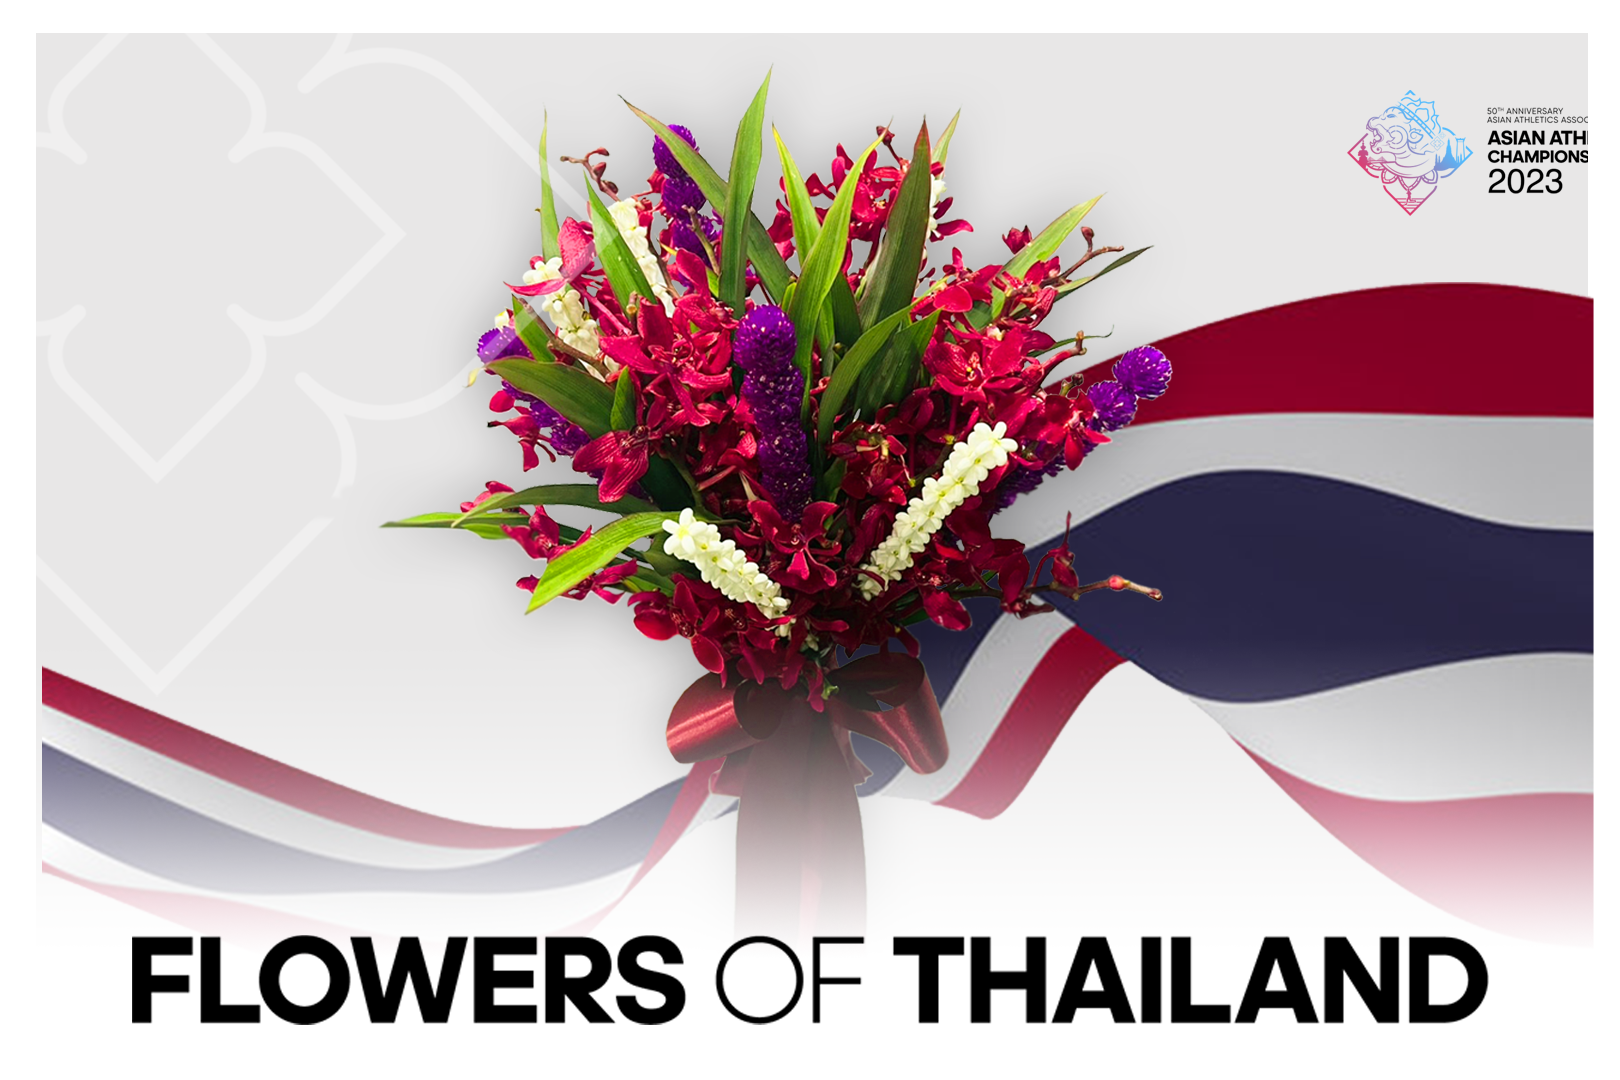 Celebrating the finish line with Thai flowers.